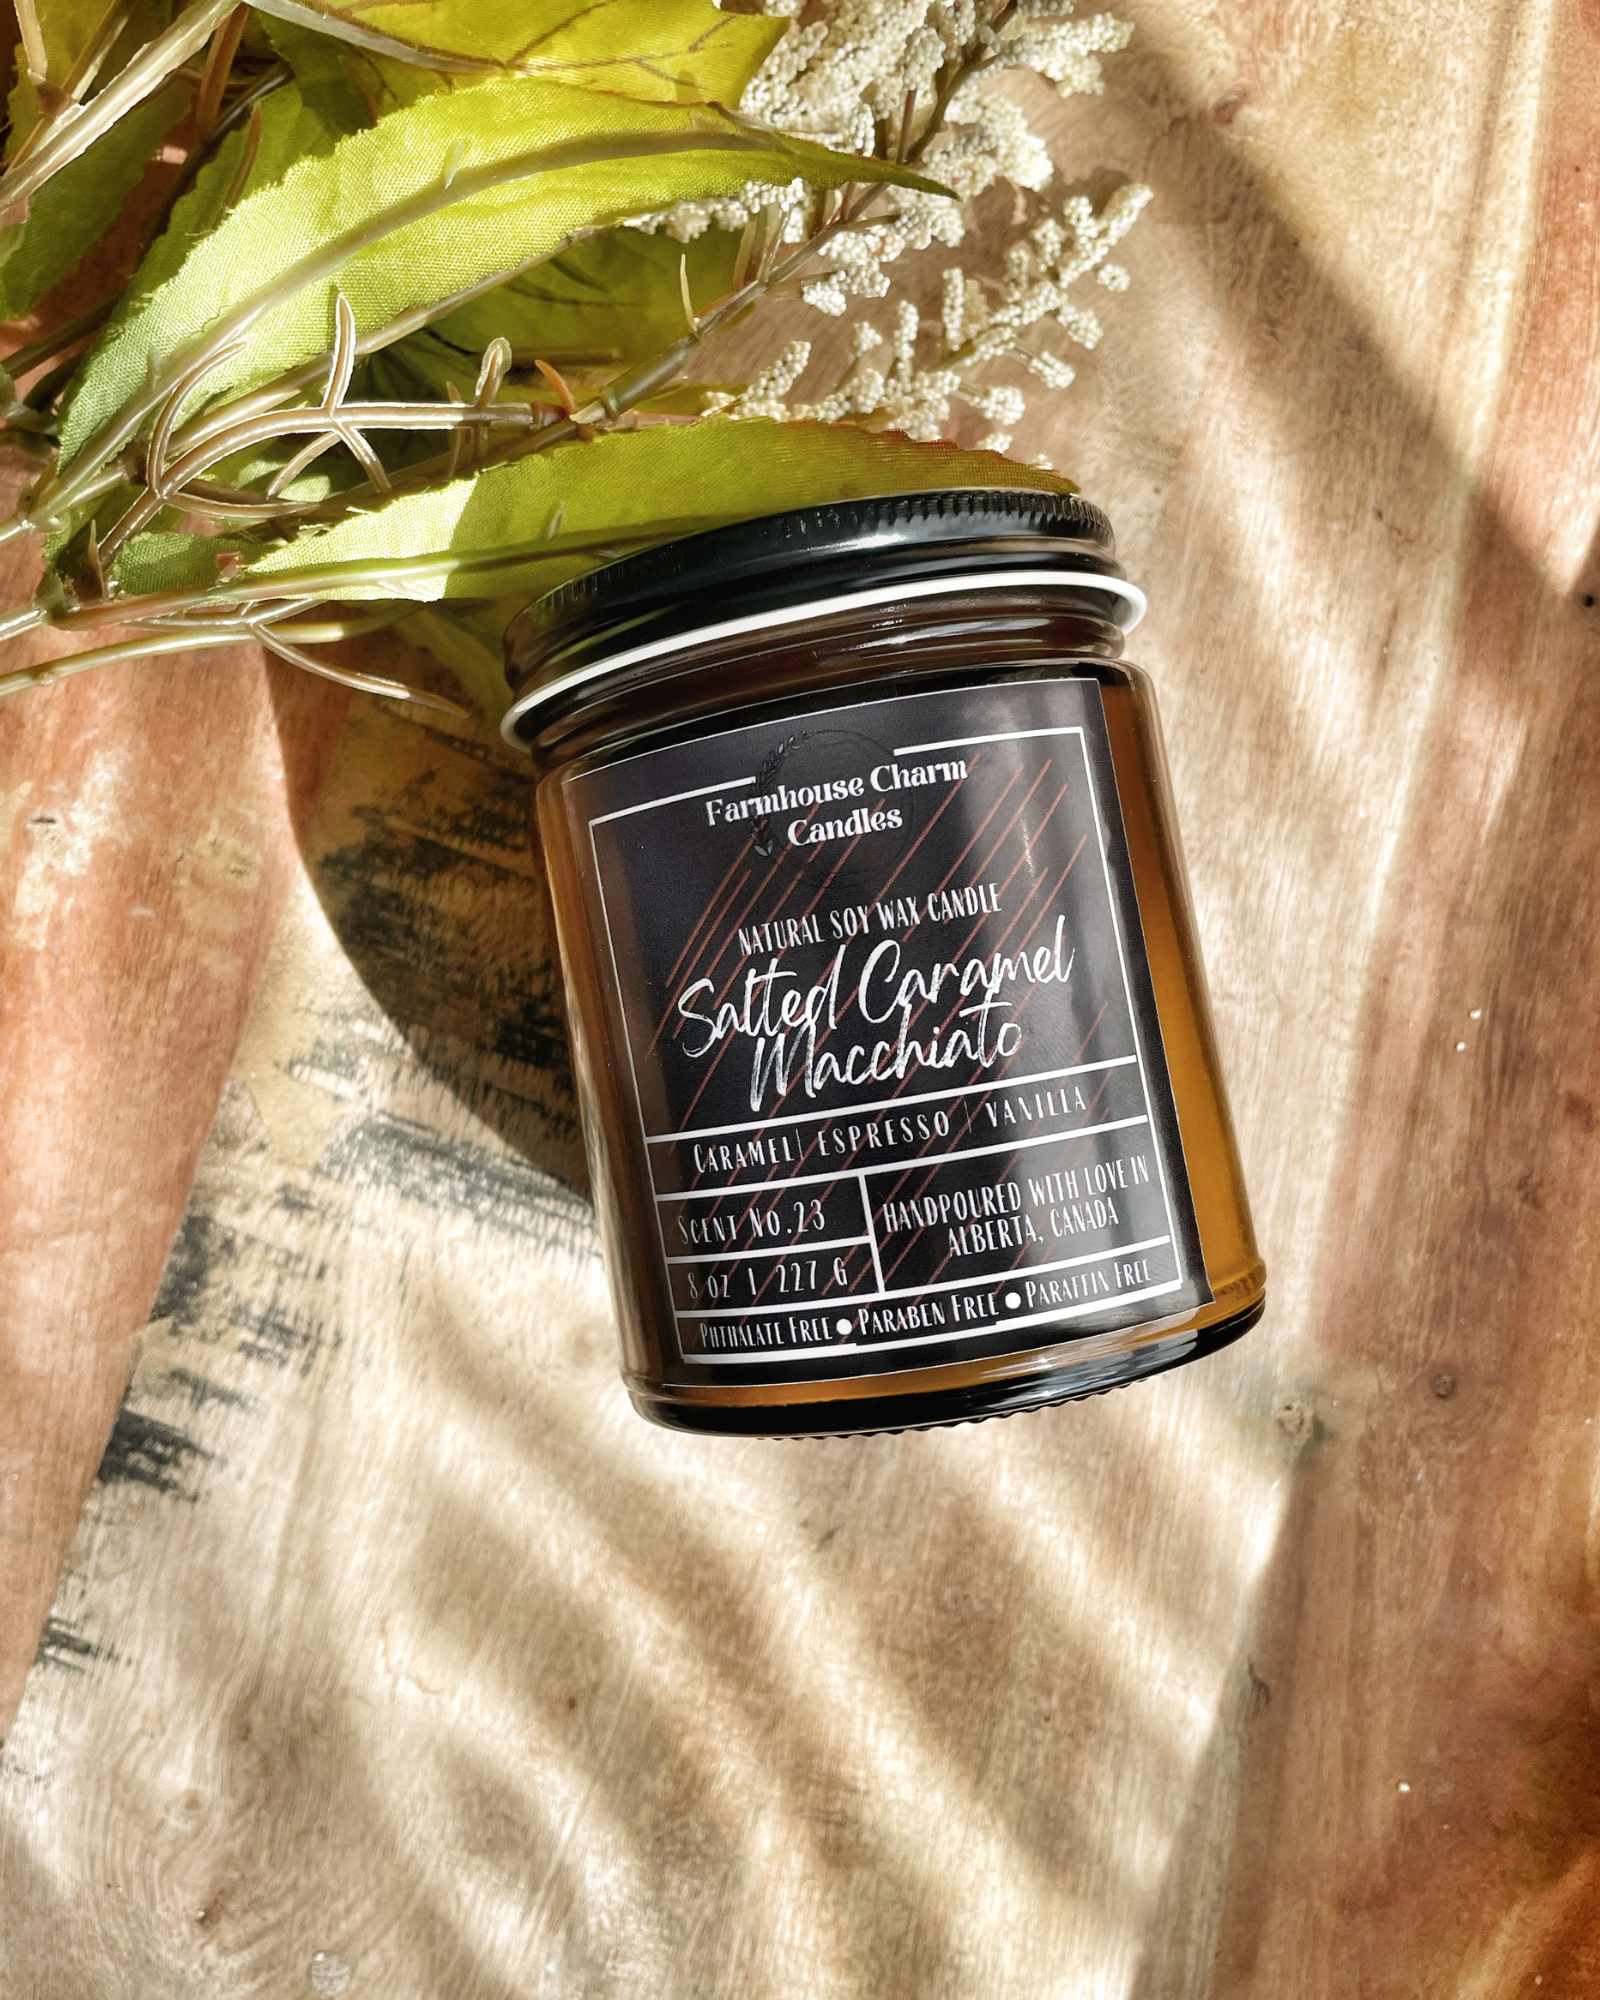 Savor the autumn season with a cozy sweater and a warm Salted Caramel Macchiato Soy Candle. For all the coffee lovers out there, the Salted Caramel Macchiato Soy Candle by Farmhouse Charm is the perfect addition to your fall routine. Infused with warm and rich aromas, this candle features a top note of caramelized sugar blended with roasted espresso, vanilla, salt, and spicy cinnamon.